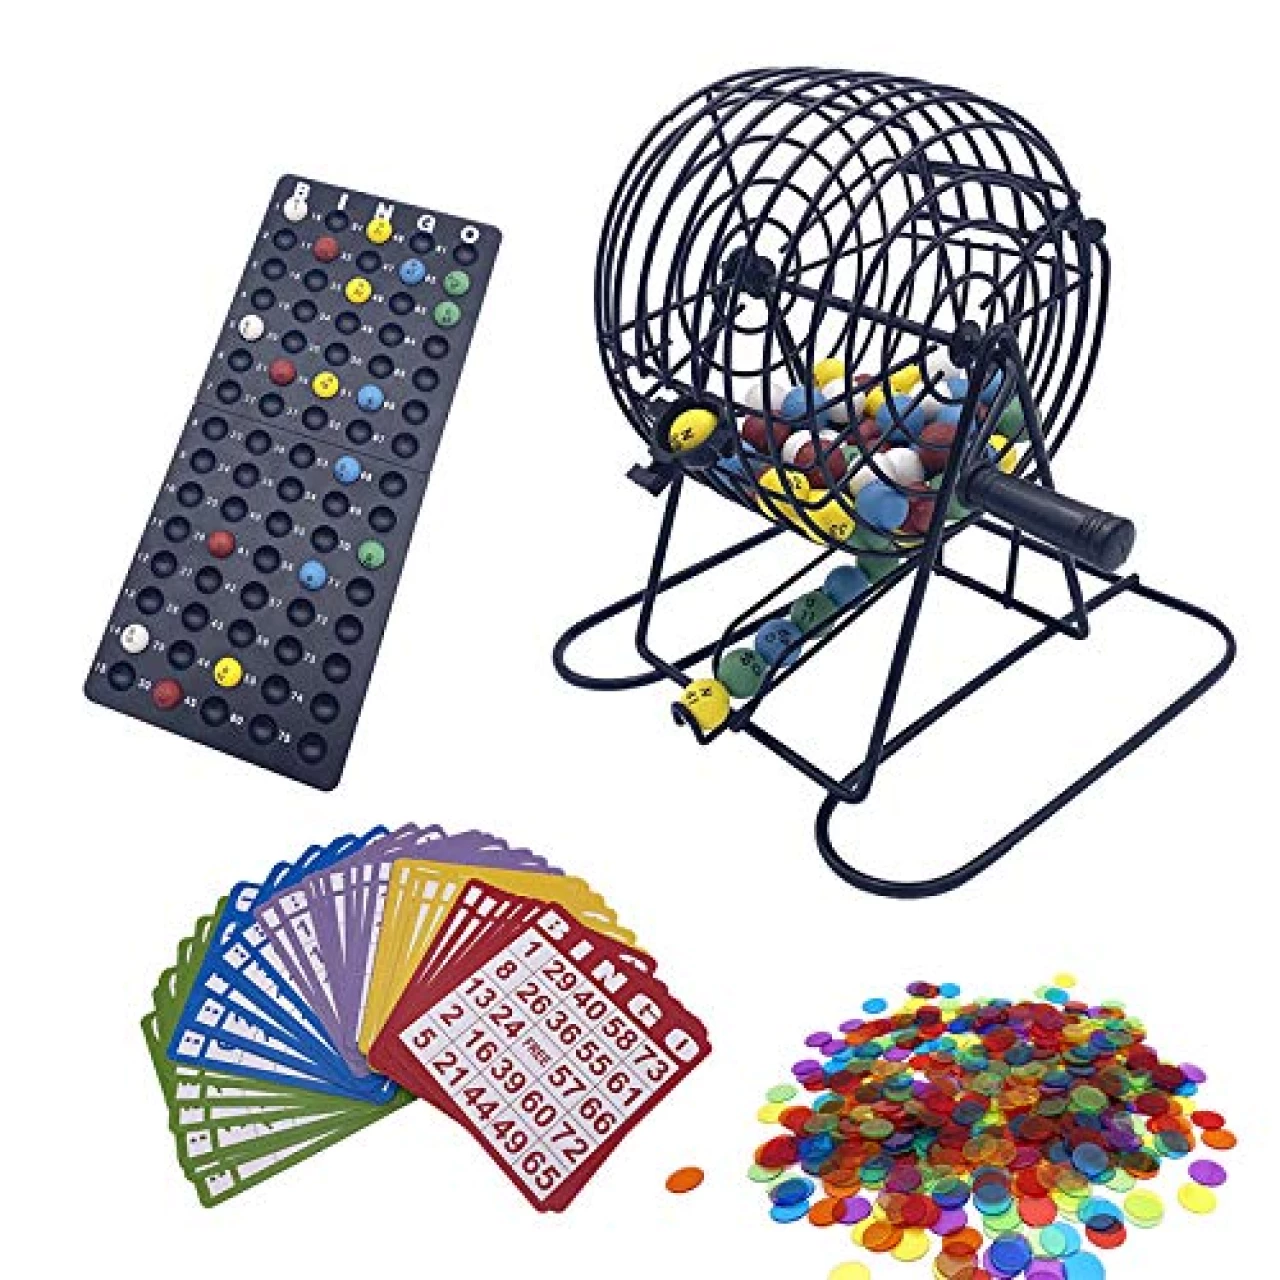 JUNWRROW Deluxe Bingo Game Set with 6 Inch Cage, Master Board,75 Colored Balls a Bag, 50 Cards, and 500 Color Mix Chips Ideal for Large Groups